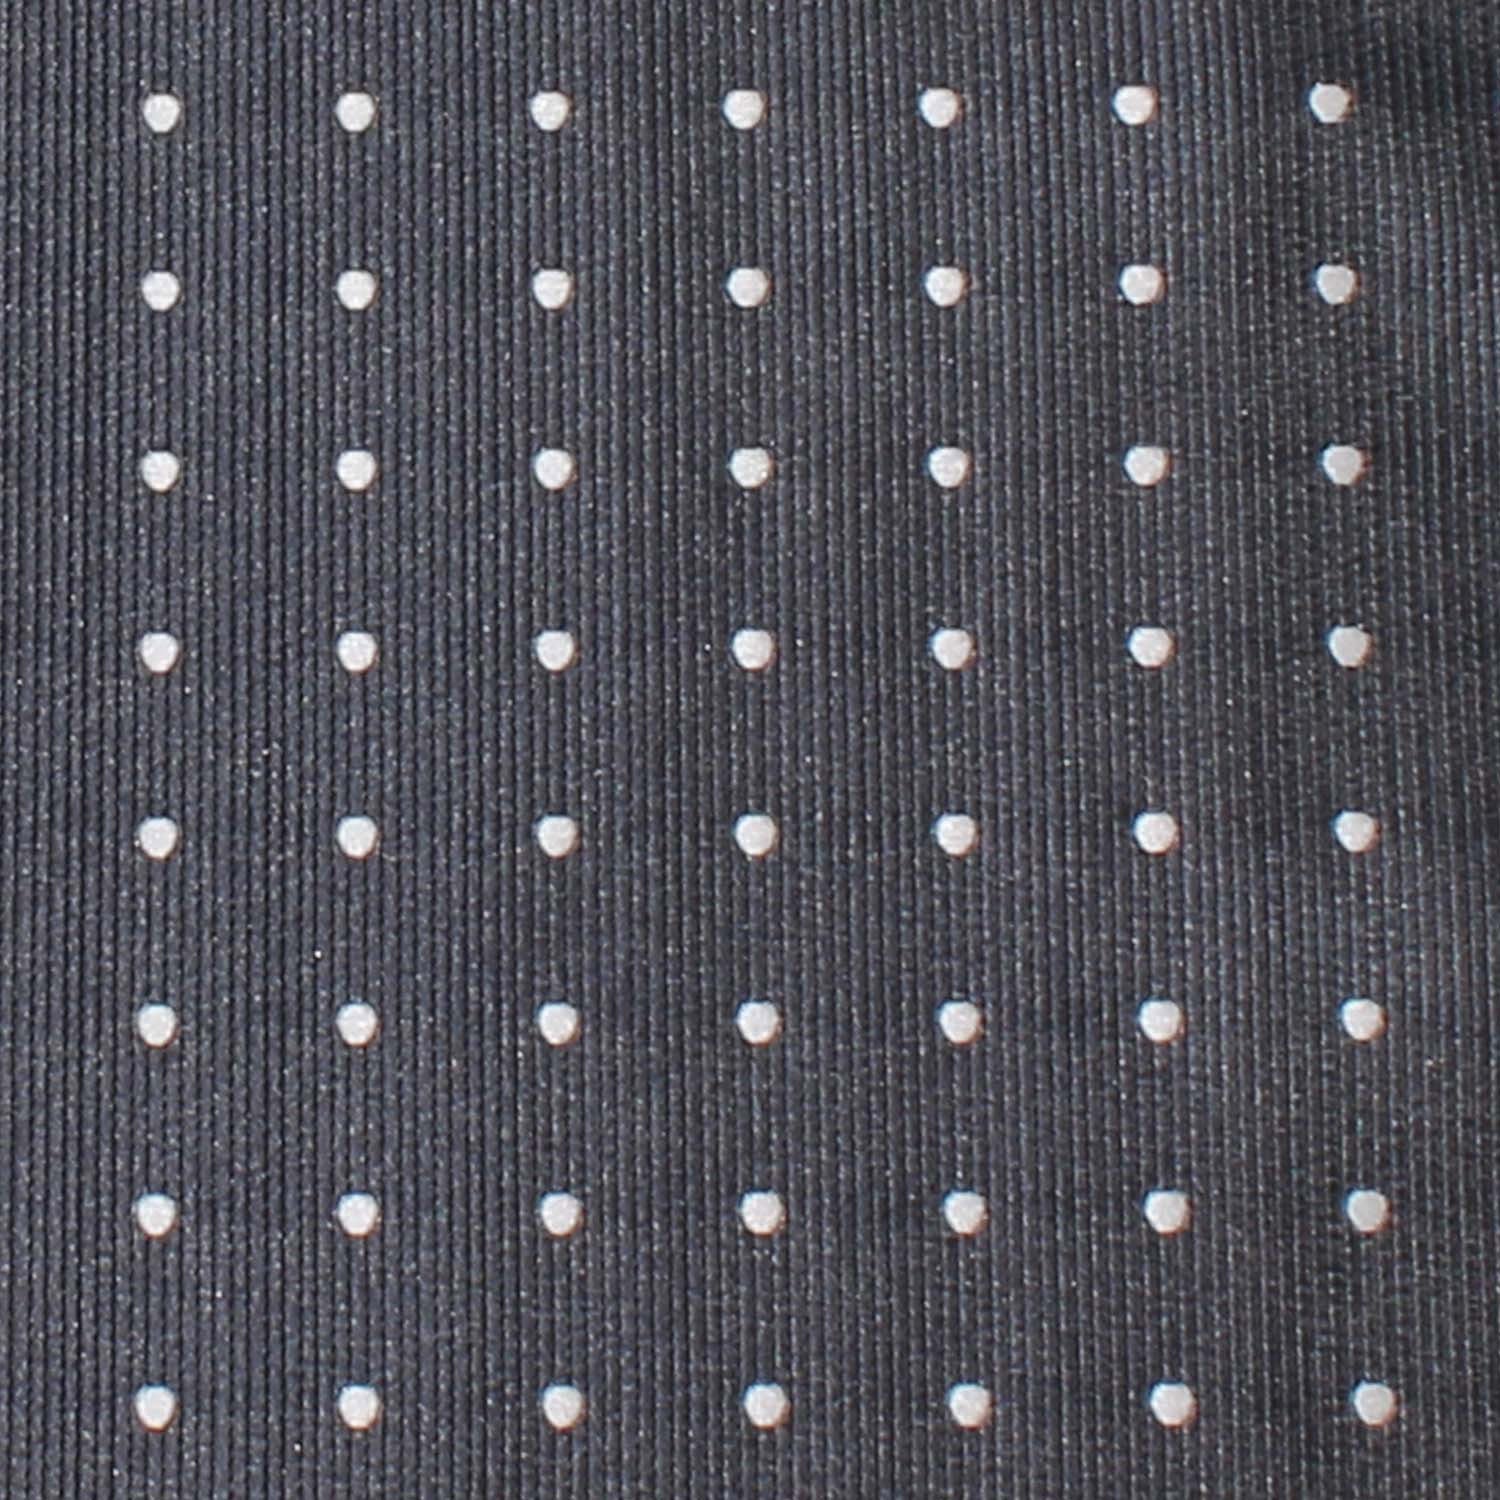 Charcoal Grey with White Polka Dots Fabric Kids Bow Tie M121